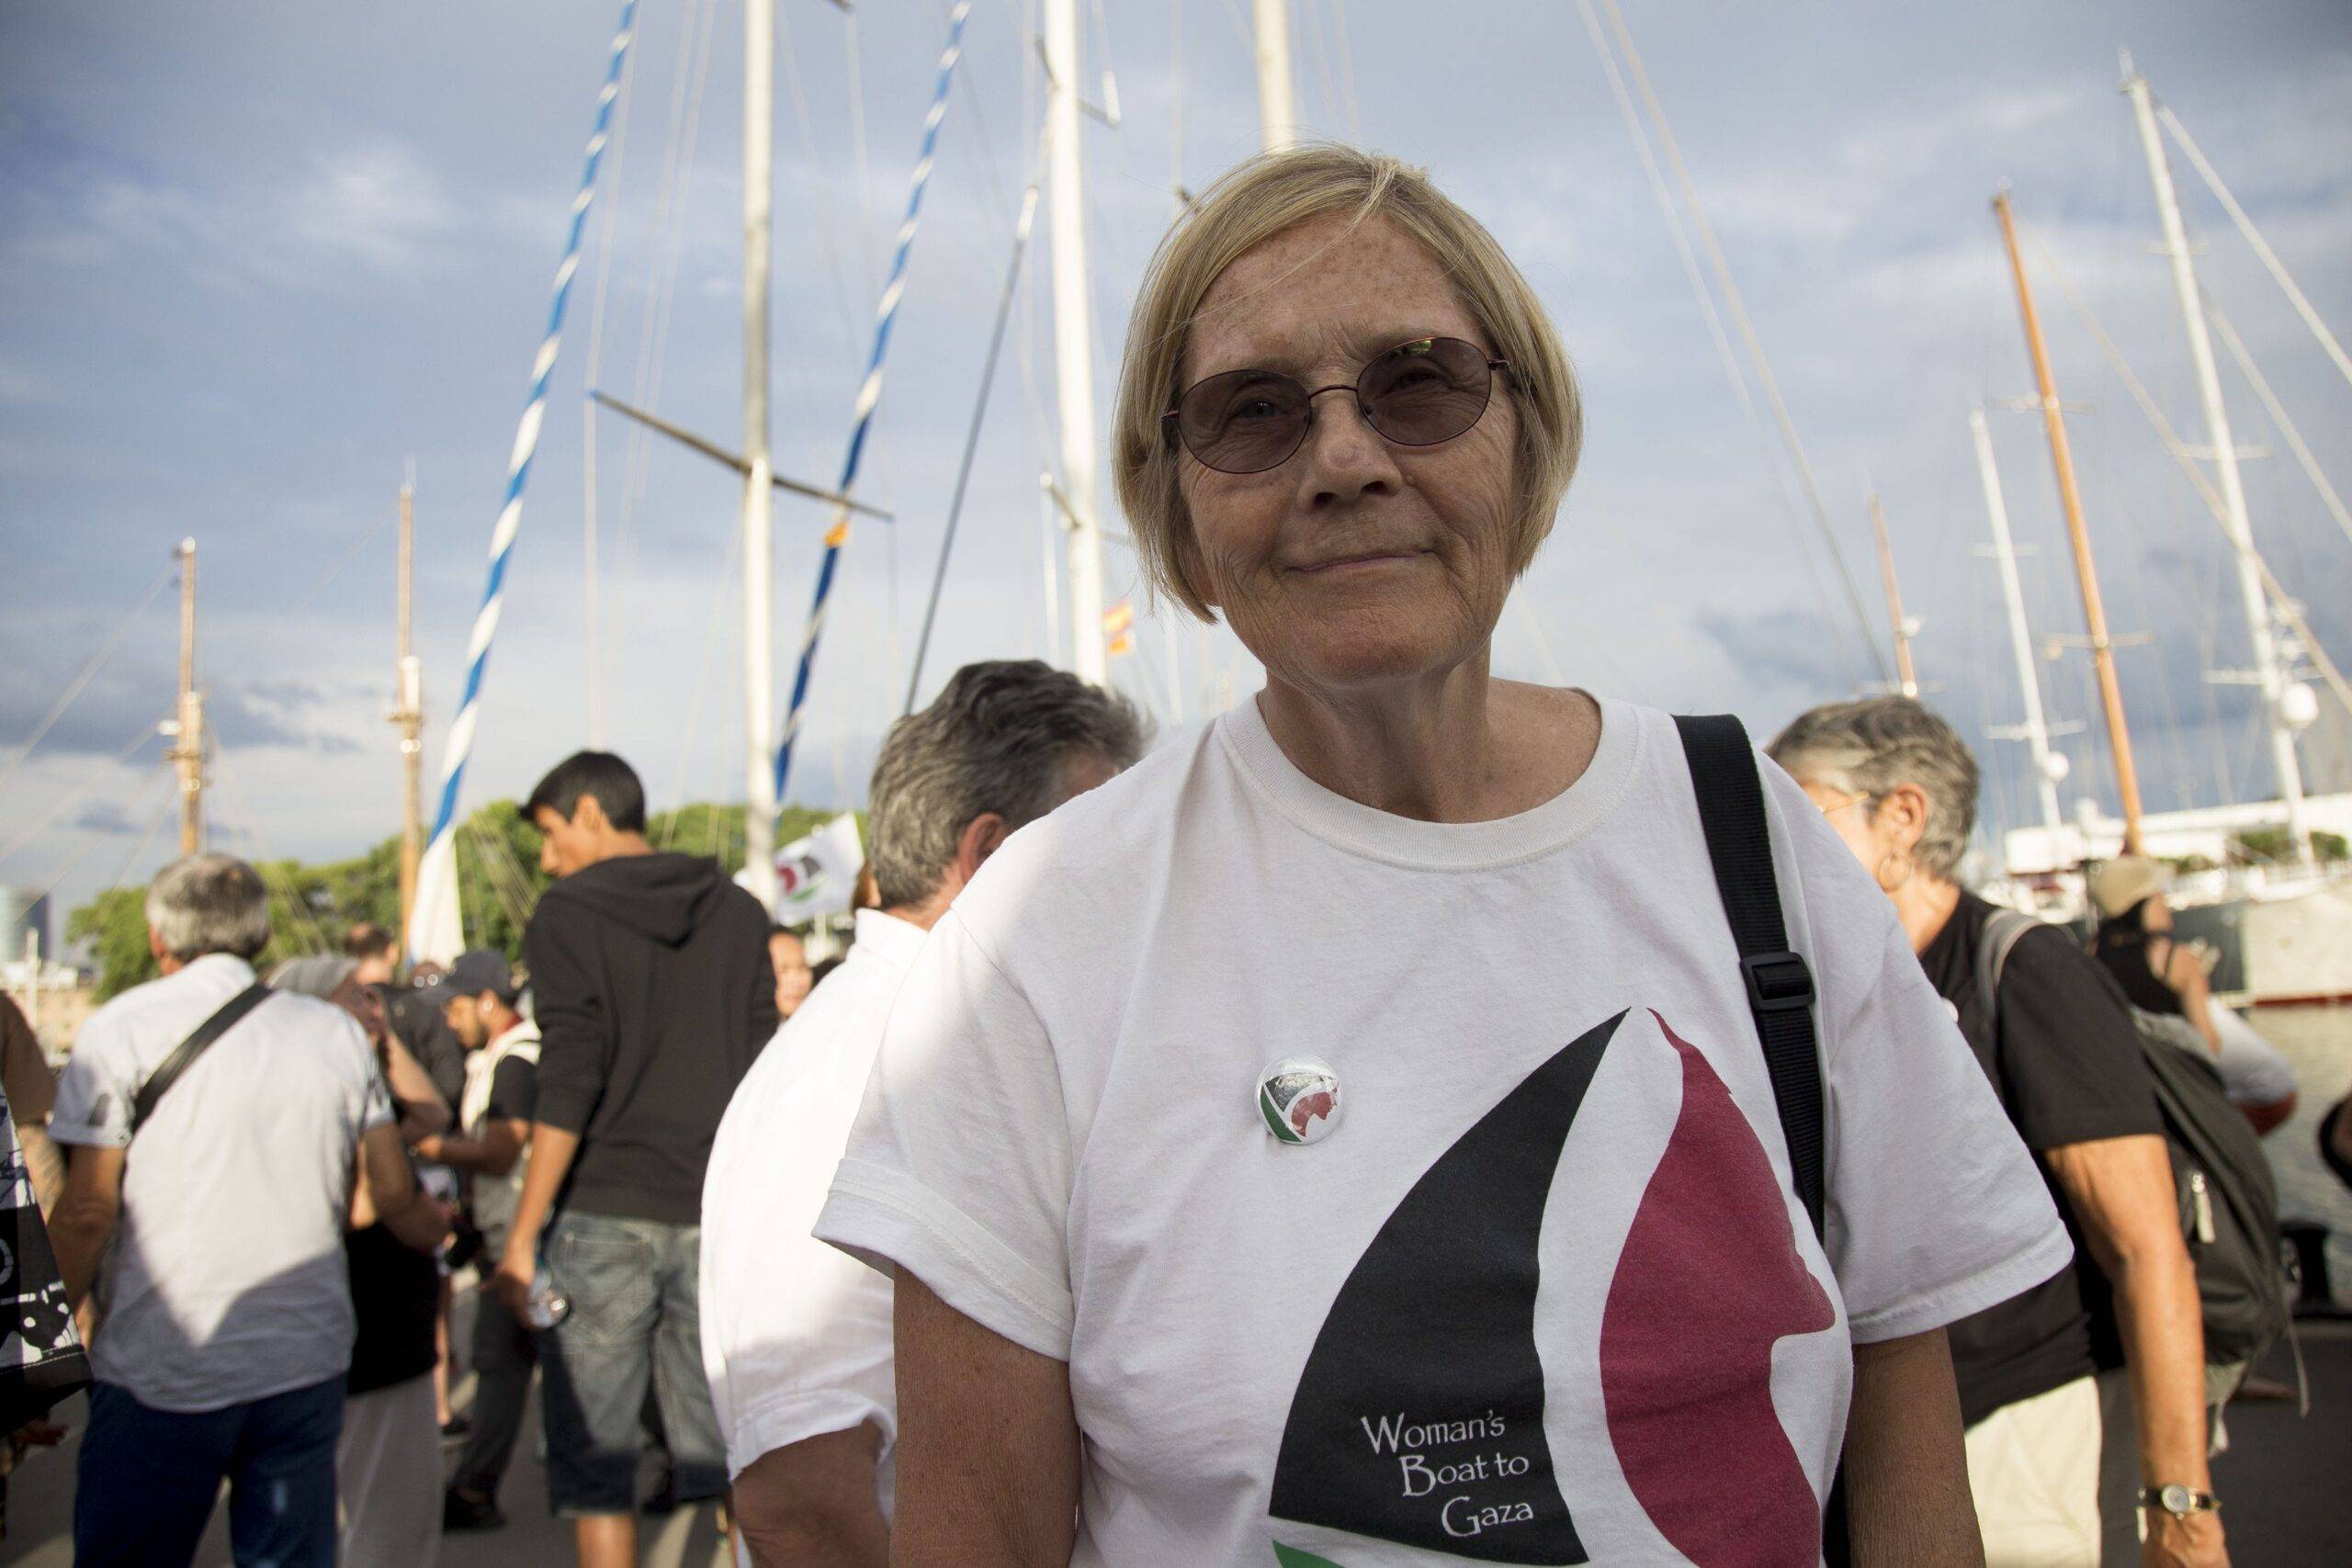 Ann Wright, member of the crew of Amal-Hope and Zaytouna-Oliva, with only female activists on board, poses before set off for the Gaza Strip from the port of Barcelona under the banner "The Women's Boat to Gaza" to break the Israeli blockade on Gaza on September 14, 2016 in Barcelona, Spain. ( Albert Llop - Anadolu Agency )